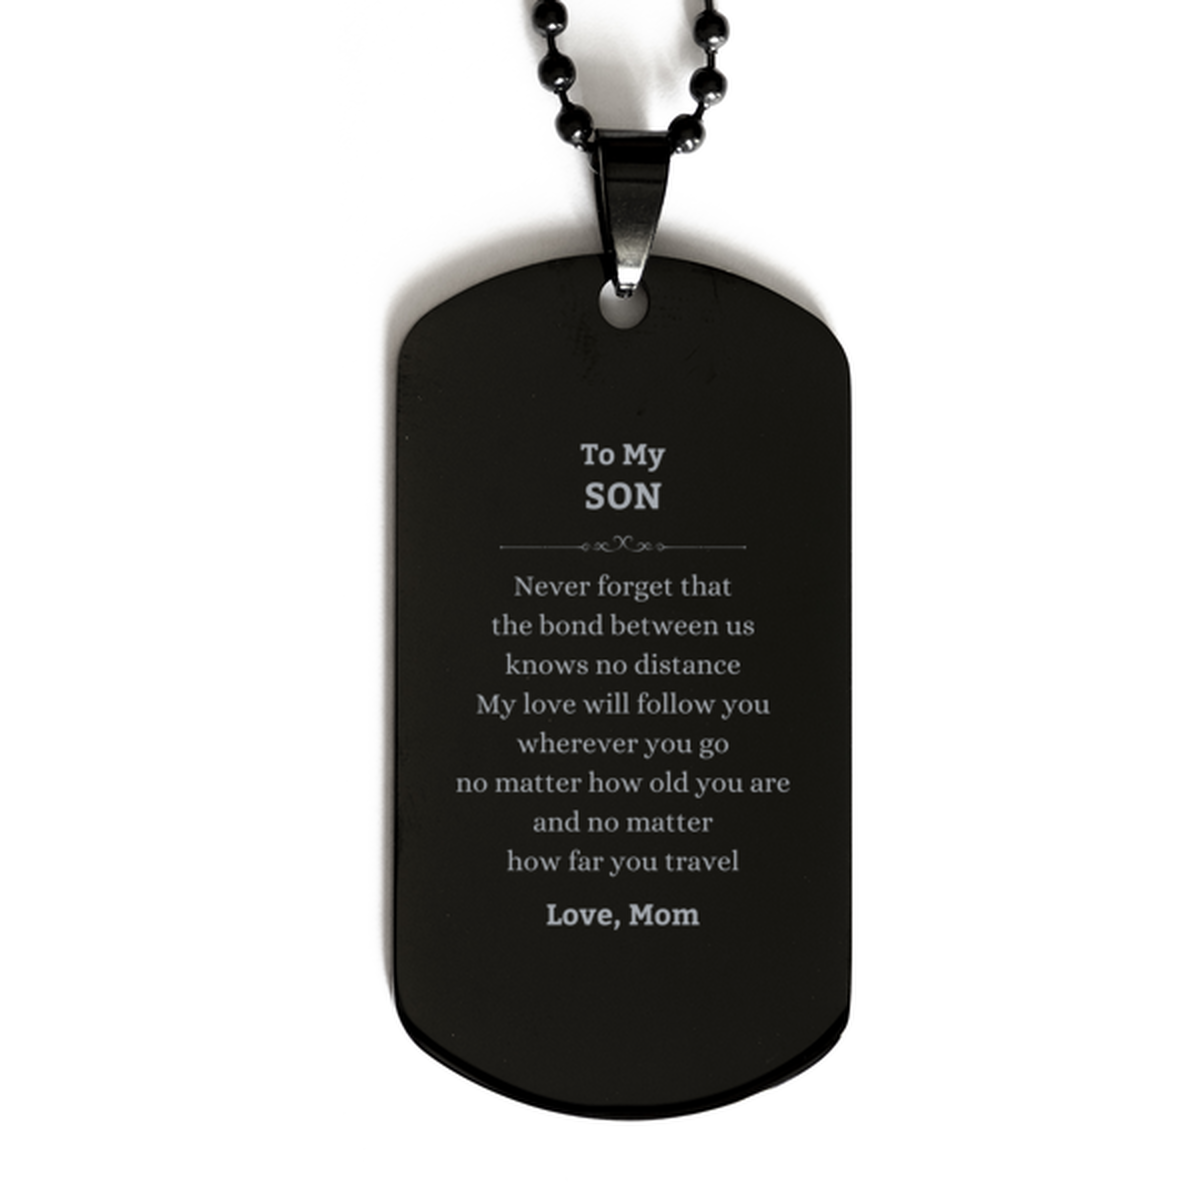 Son Birthday Gifts from Mom, Adjustable Black Dog Tag for Son Christmas Graduation Unique Gifts Son Never forget that the bond between us knows no distance. Love, Mom